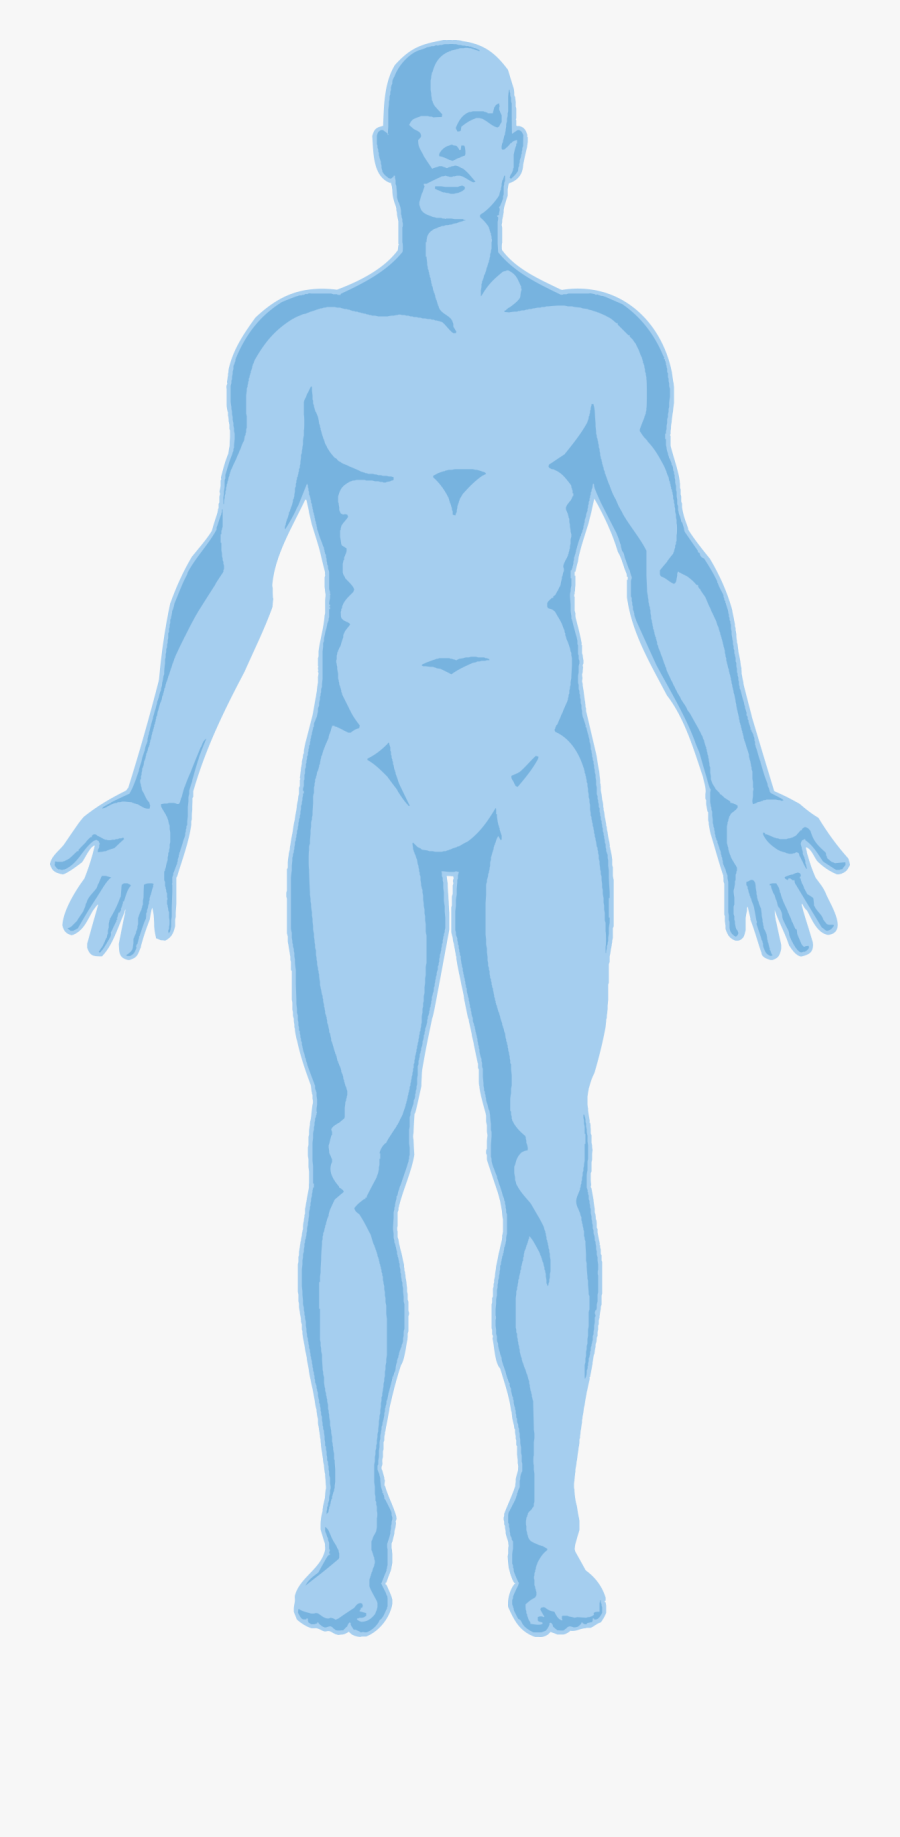 Body Outline Transparent Background - Human Body Outline Transparent Background, Transparent Clipart